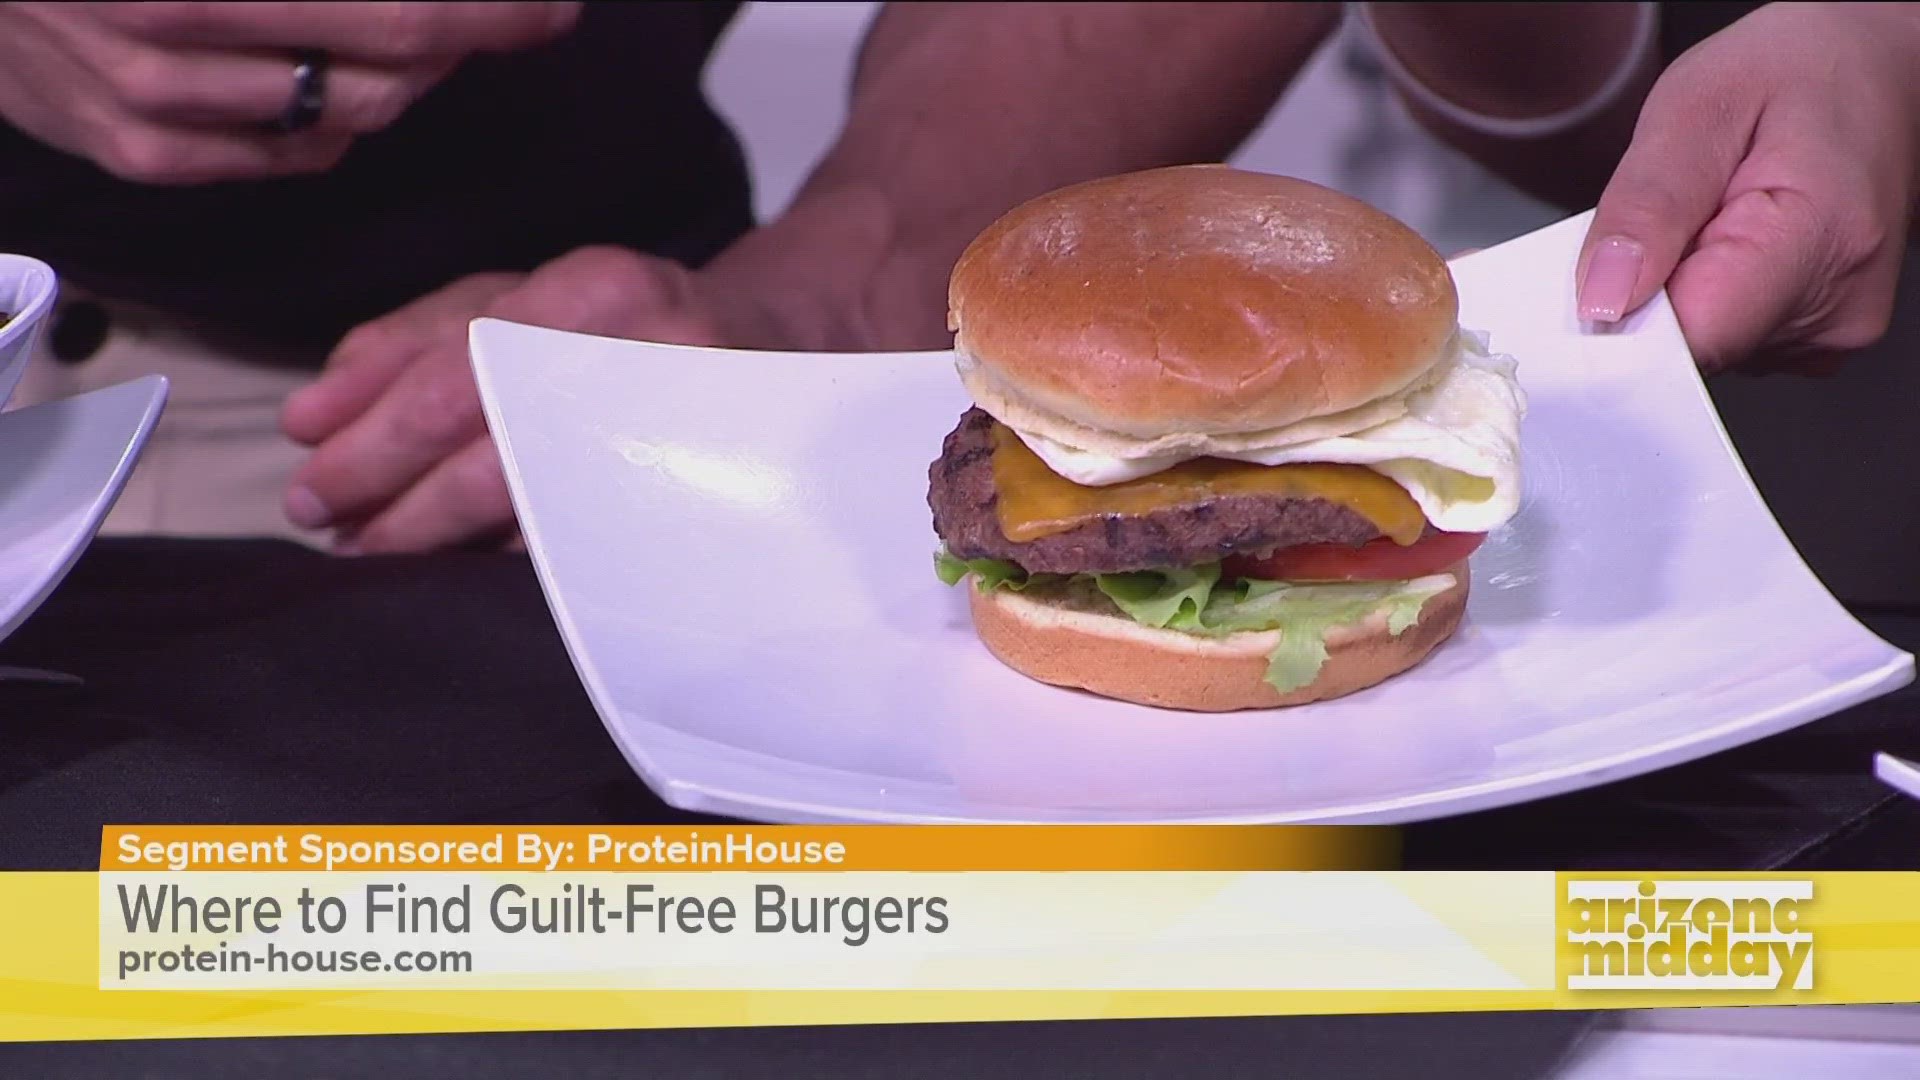 ProteinHouse’s Andrew Bick comes to our Arizona Midday kitchen to share tips for preparing a guilt-free burger with nutritious toppings!